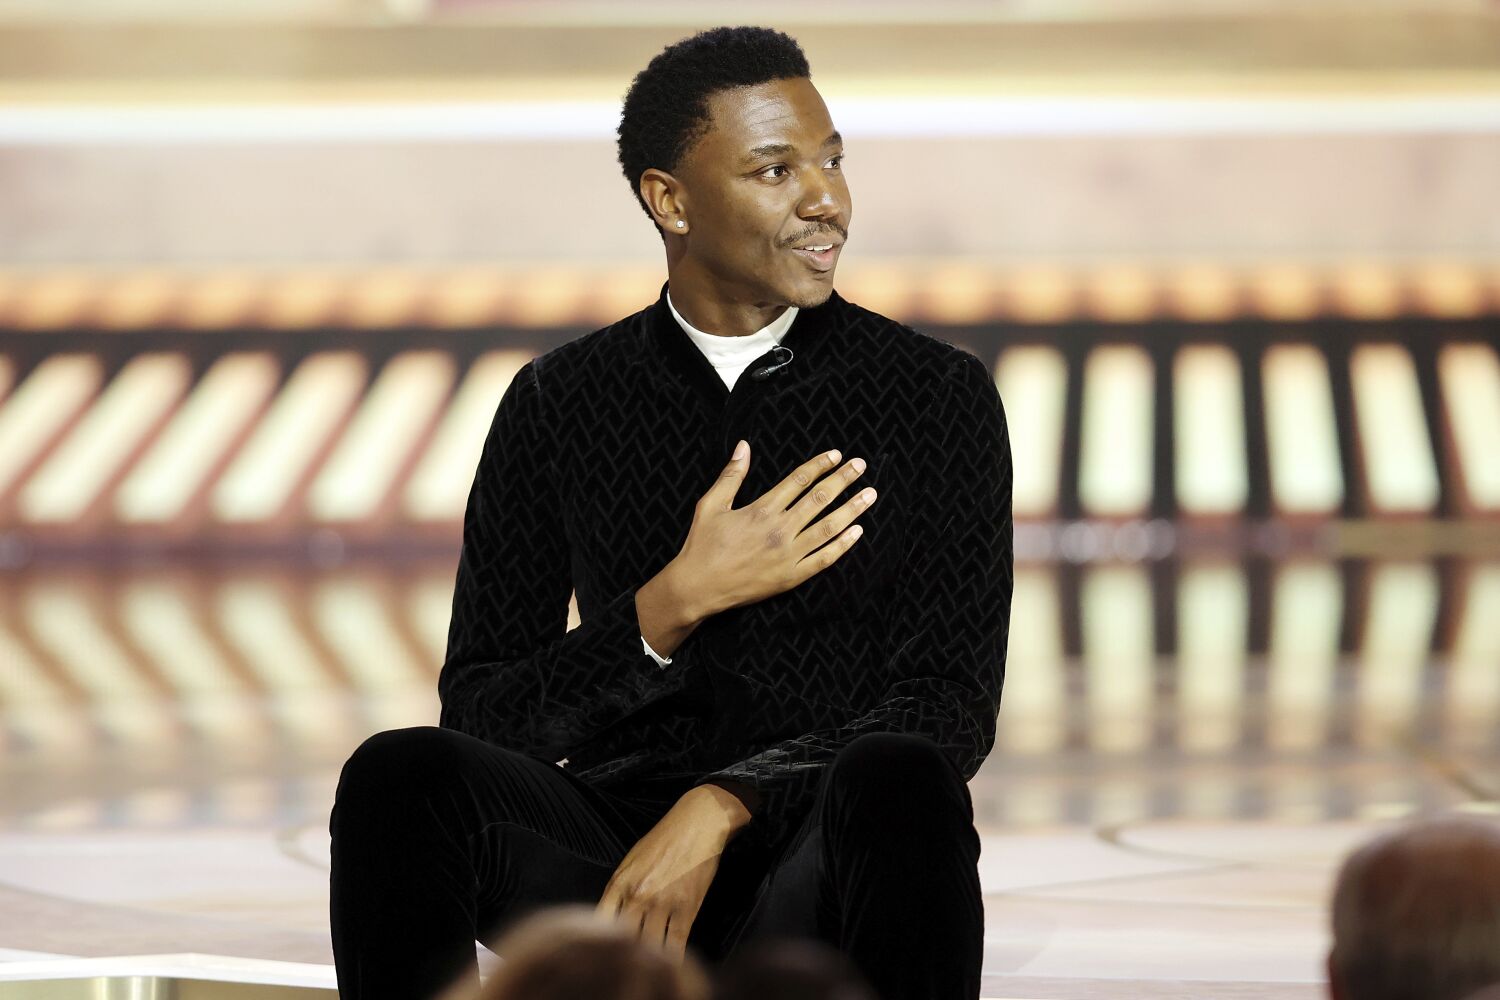 Missed the Golden Globes? Here are the 5 must-see moments from the show's comeback